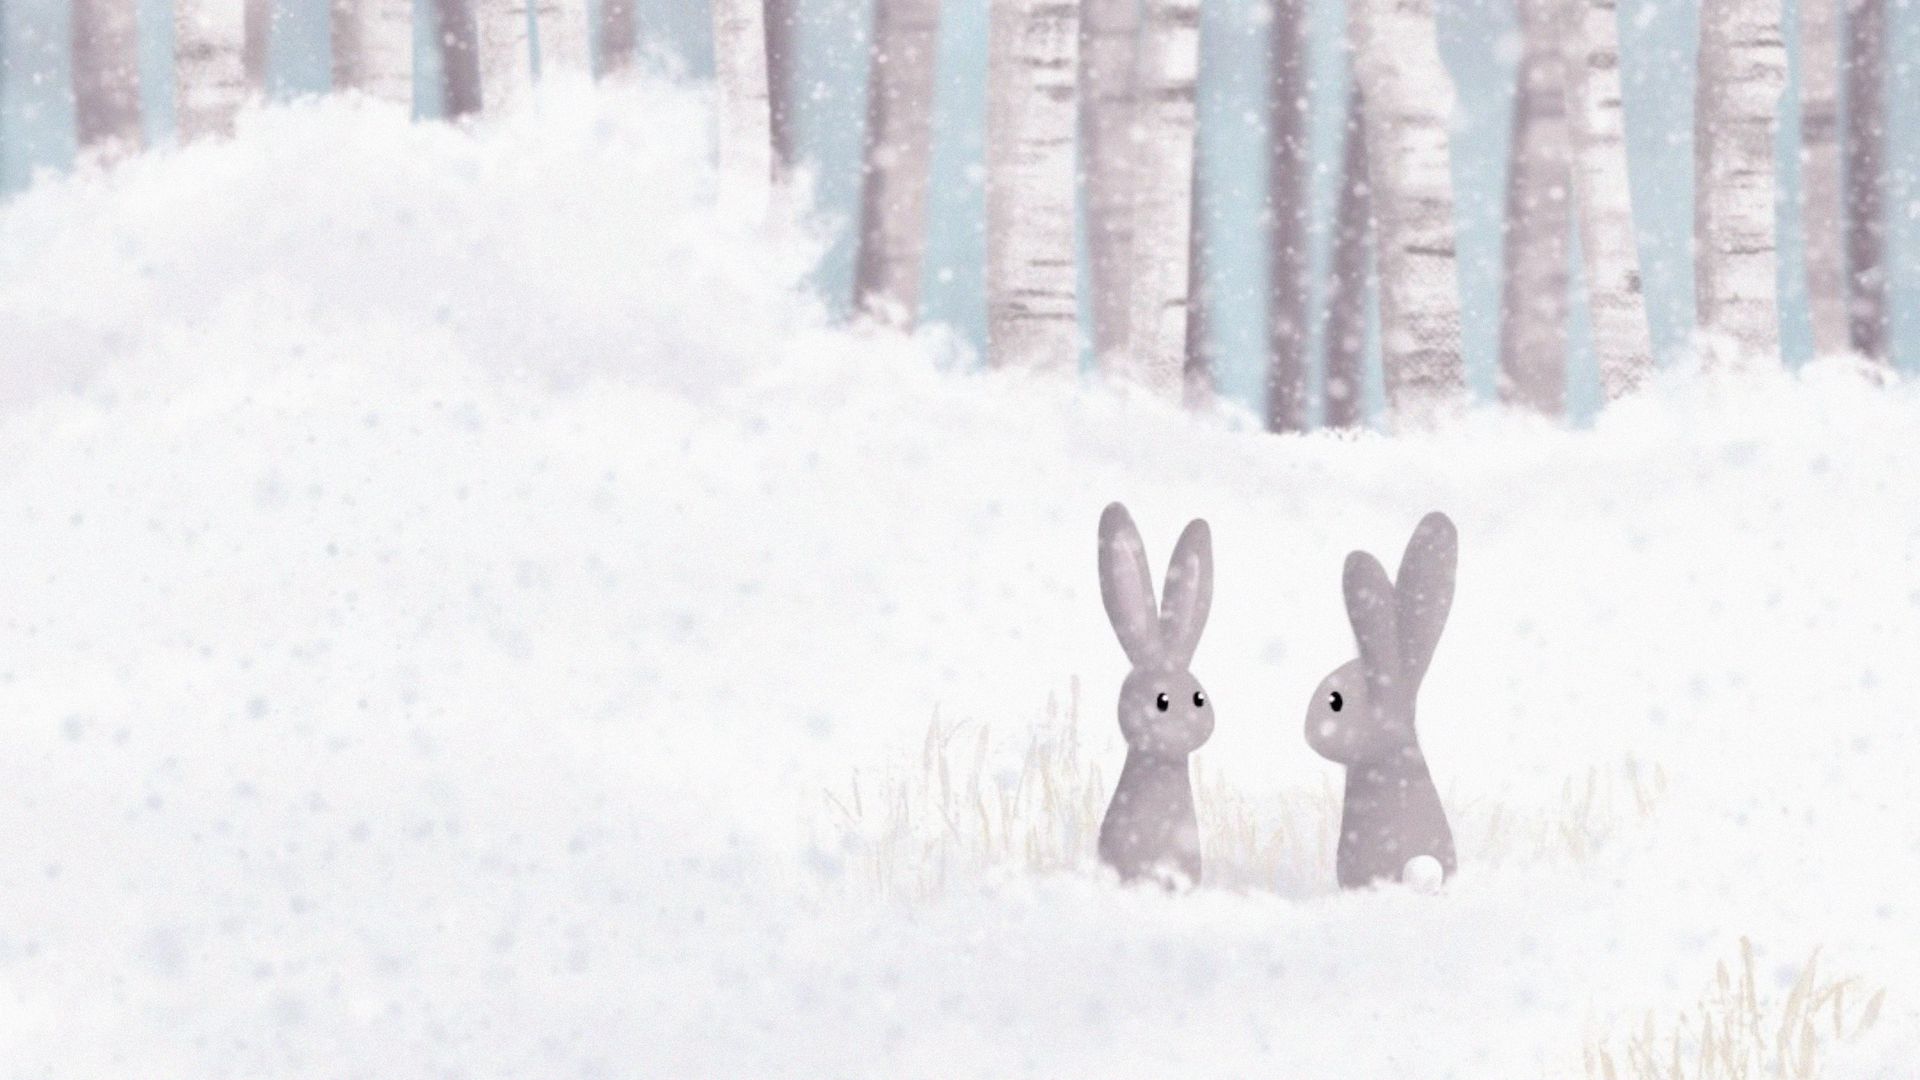 Download wallpaper 1920x1080 hares, forest, snow, winter, art full hd, hdtv, fhd, 1080p HD background